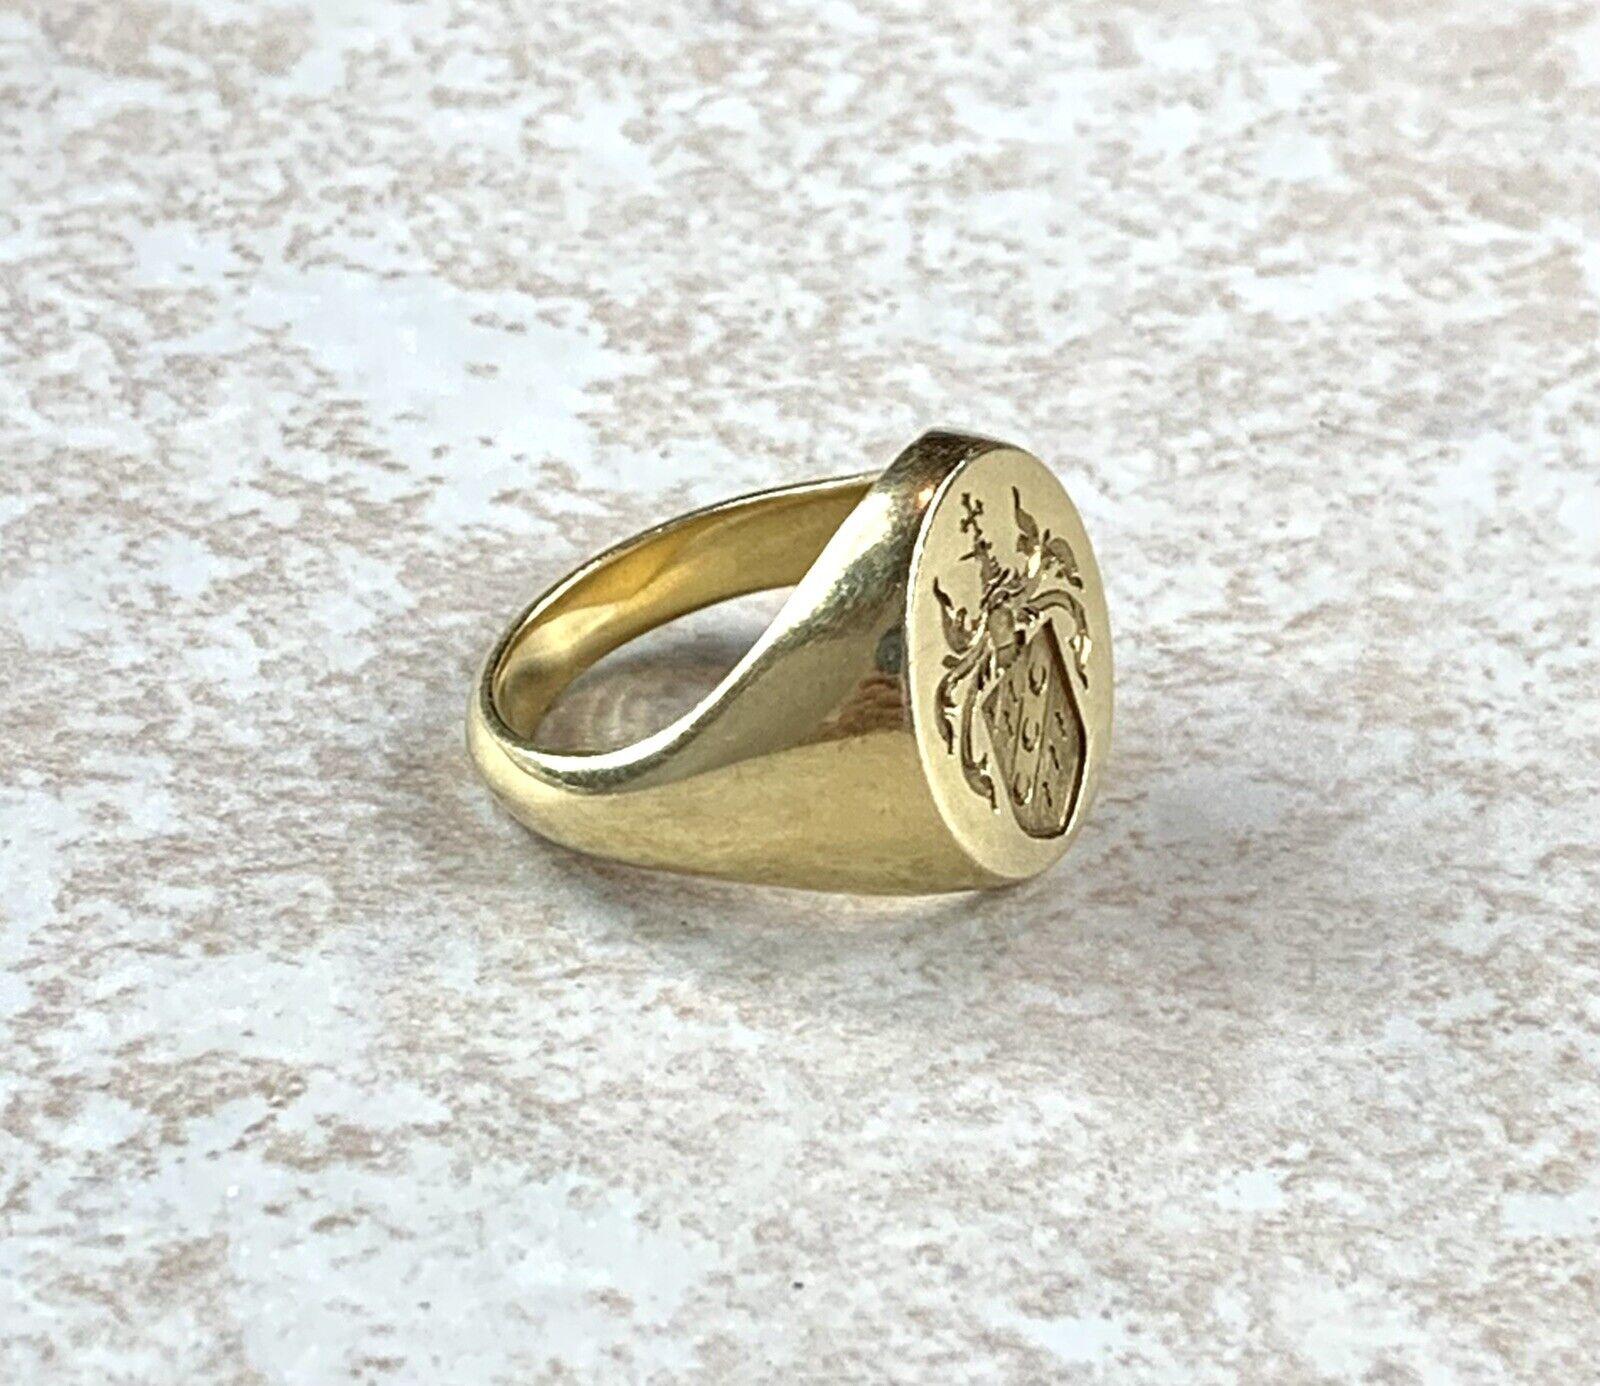 Tiffany & Co. 18k Yellow Gold Signet Ring Vintage Size 11.5 27 Grams

Here is your chance to purchase a beautiful and highly collectible designer ring.  Truly a great piece at a great price! 

Total weight is 27 grams.  

The ring size is 11.5 but